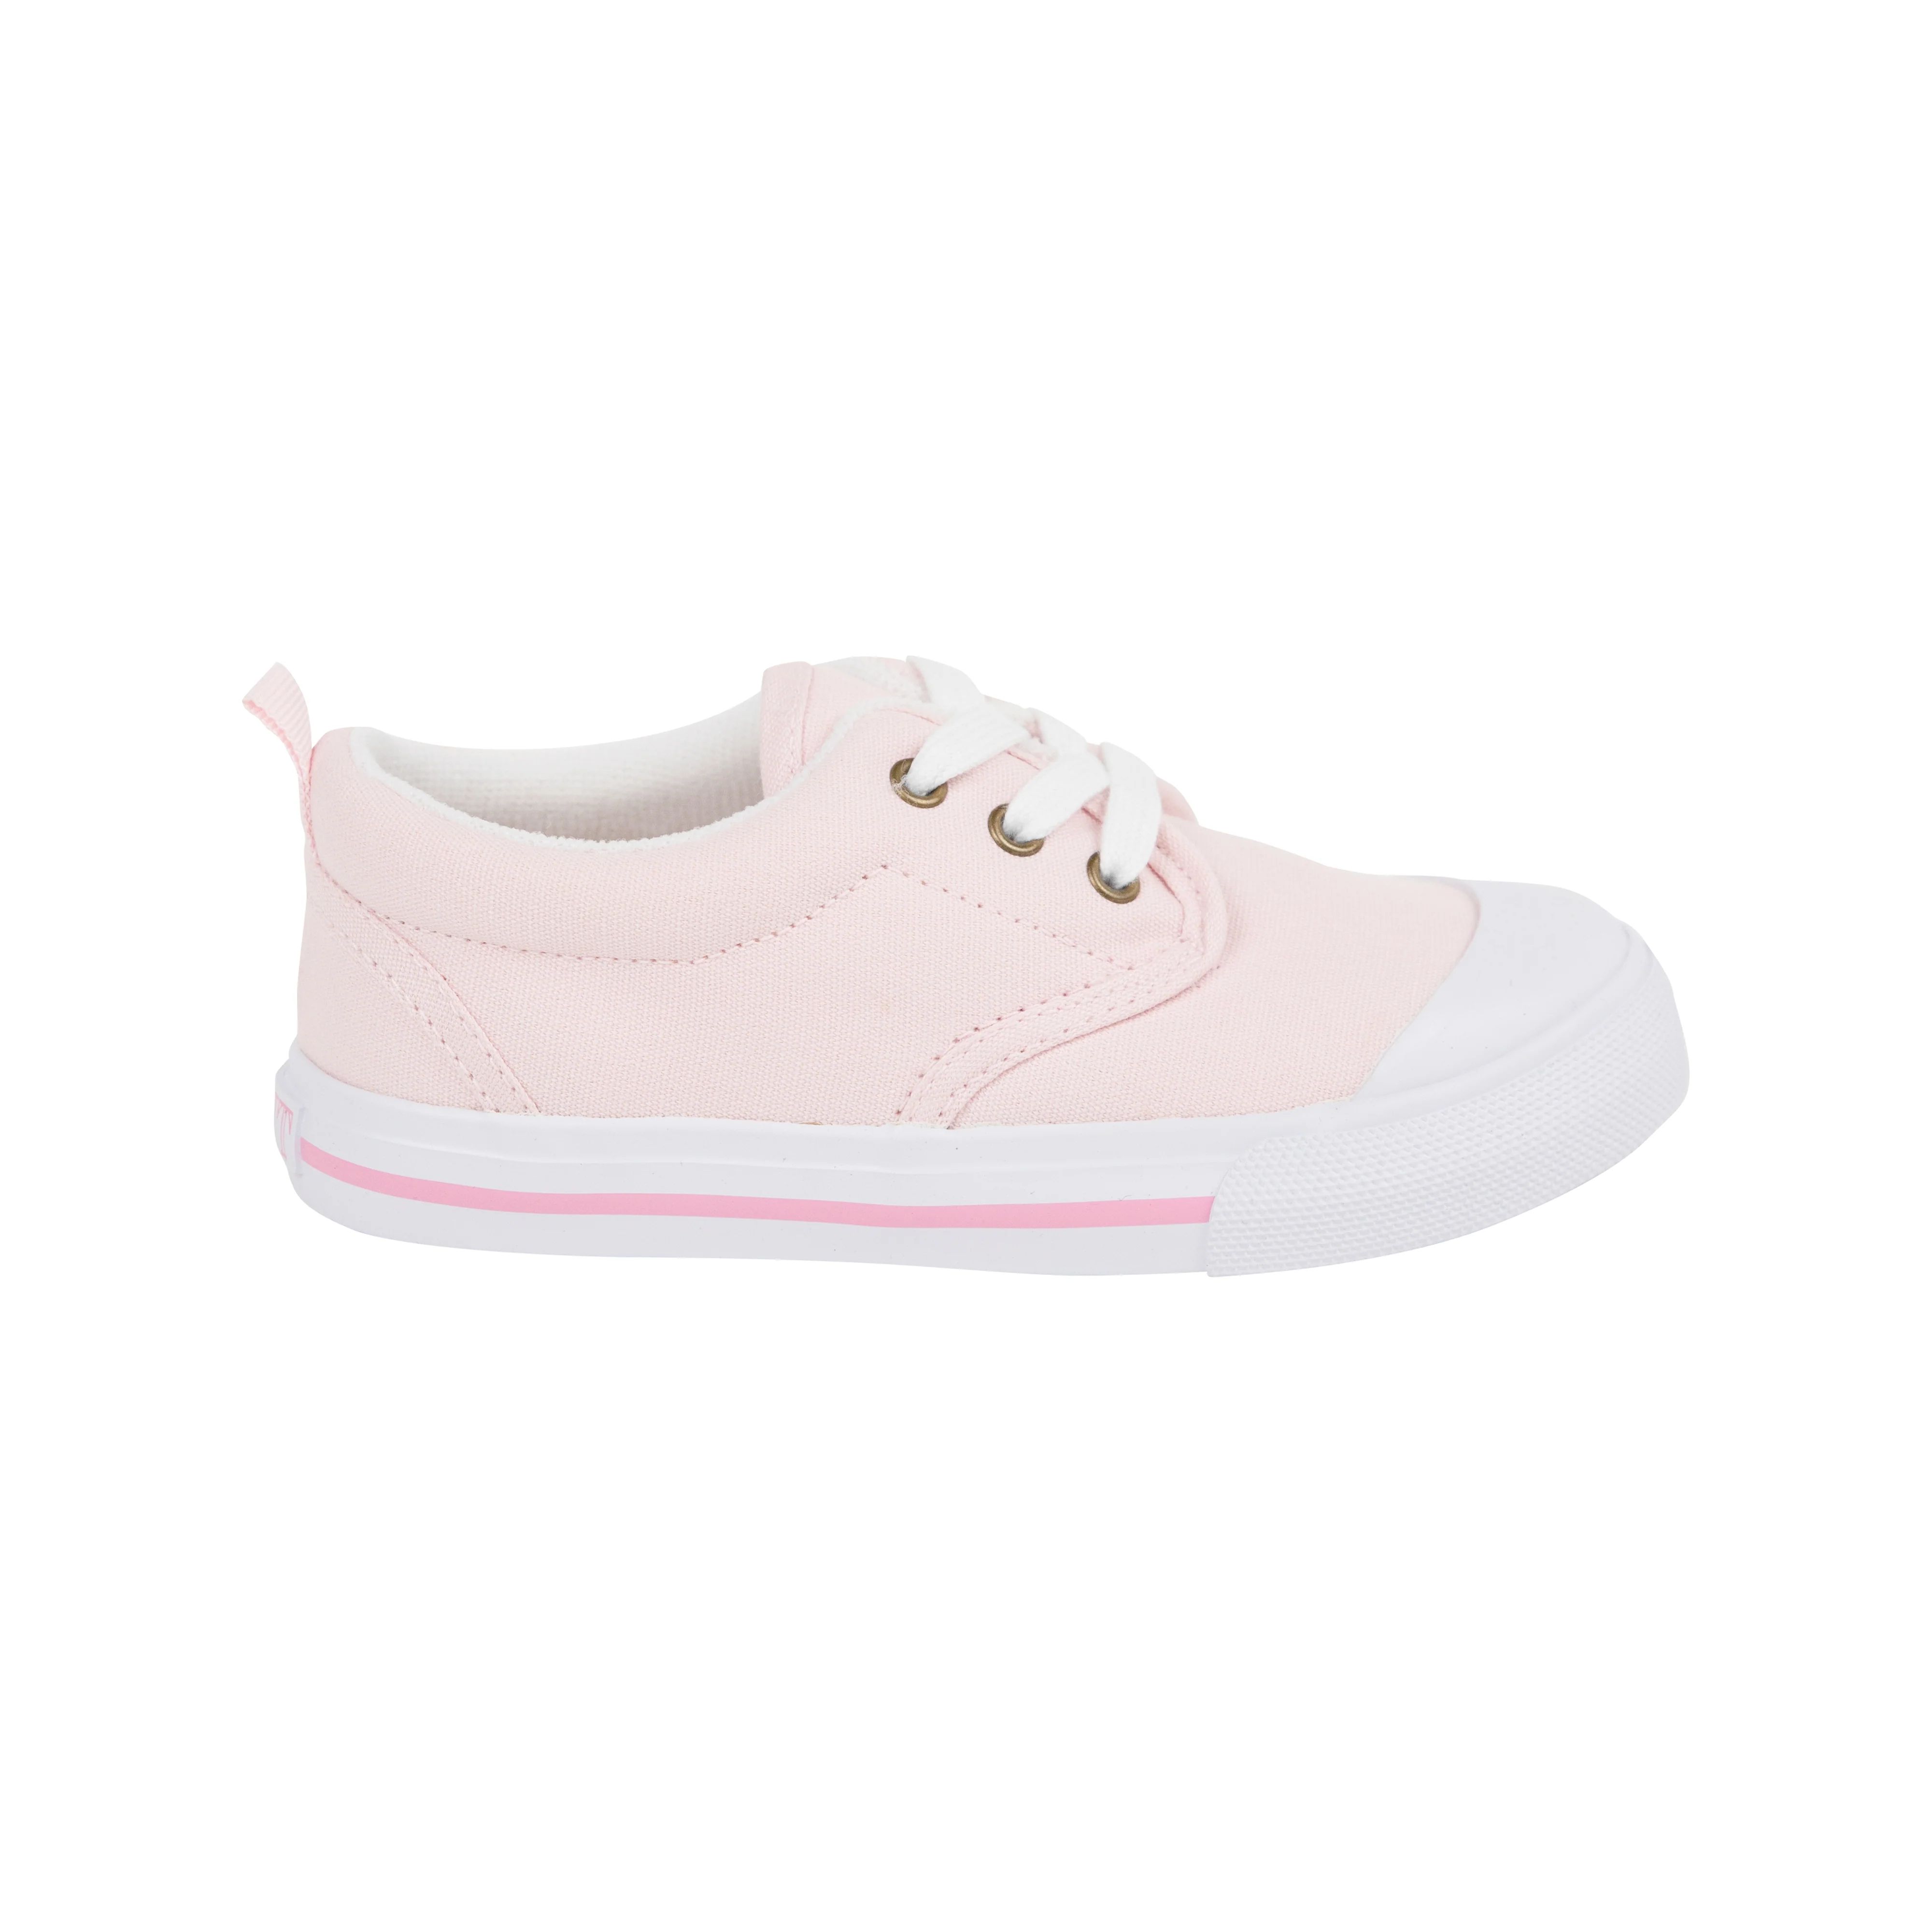 Prep Step Sneakers - Palm Beach Pink with Palm Beach Pink Stripe | The Beaufort Bonnet Company